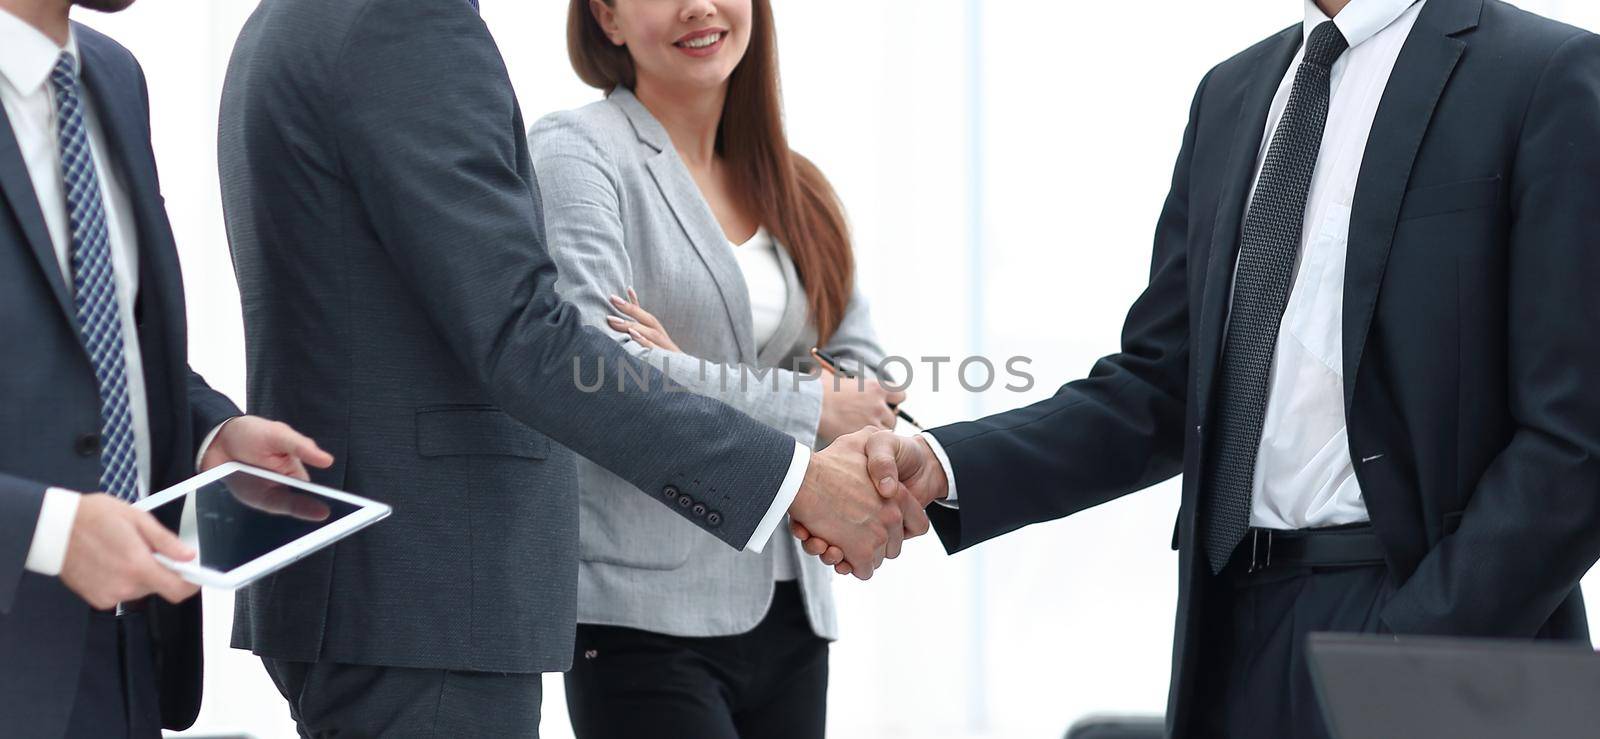 financial Manager and handshake of business partners.